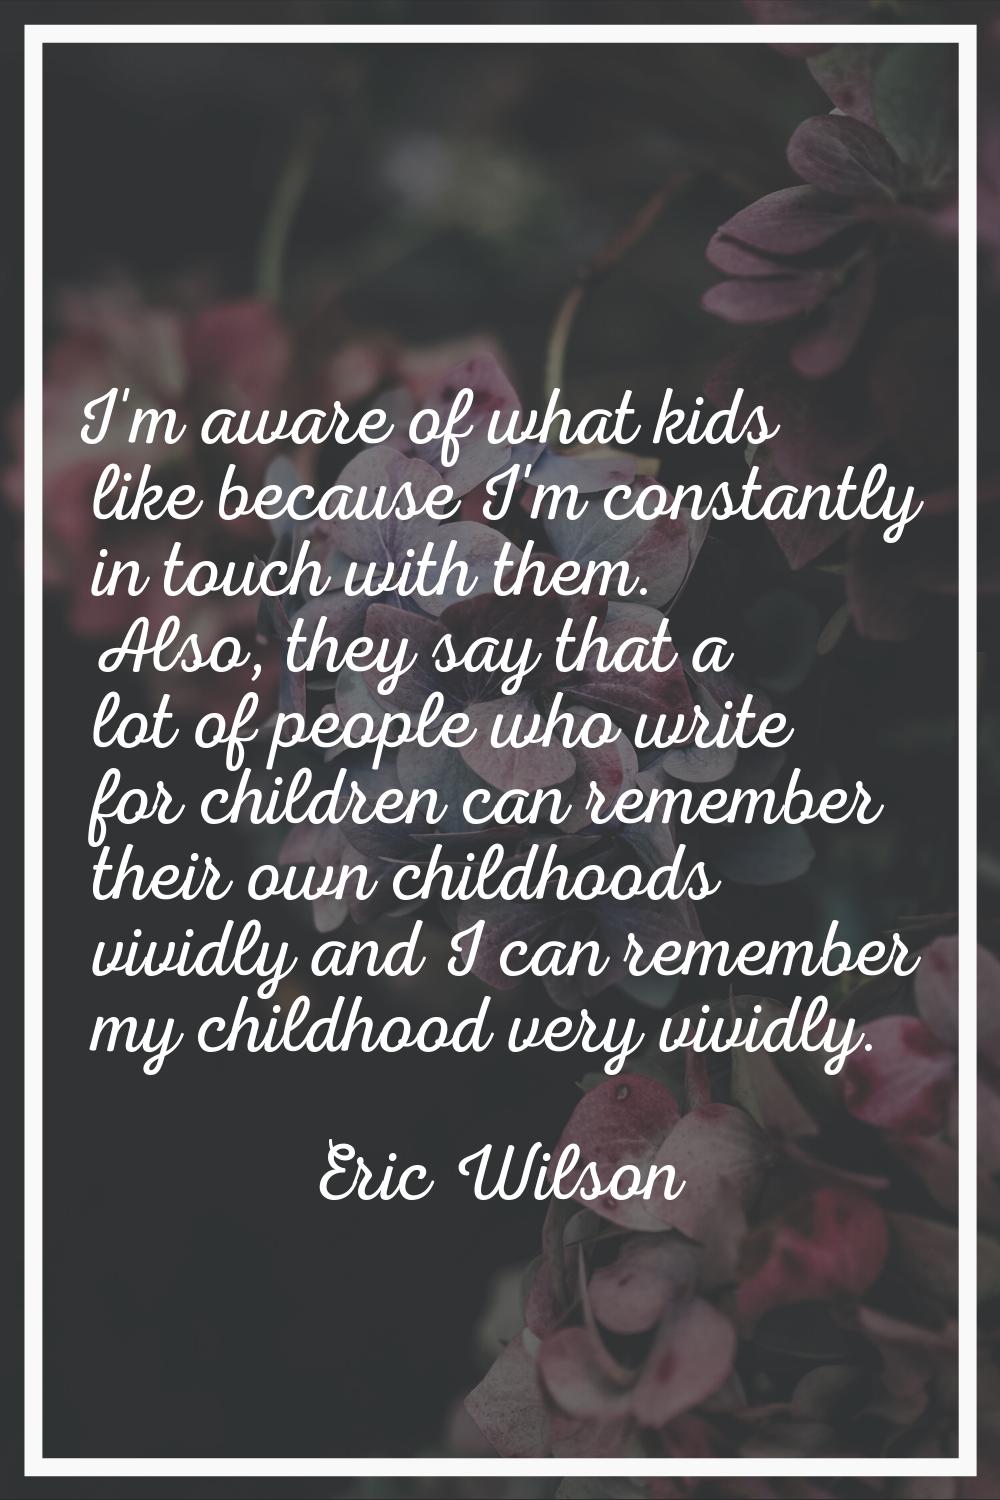 I'm aware of what kids like because I'm constantly in touch with them. Also, they say that a lot of